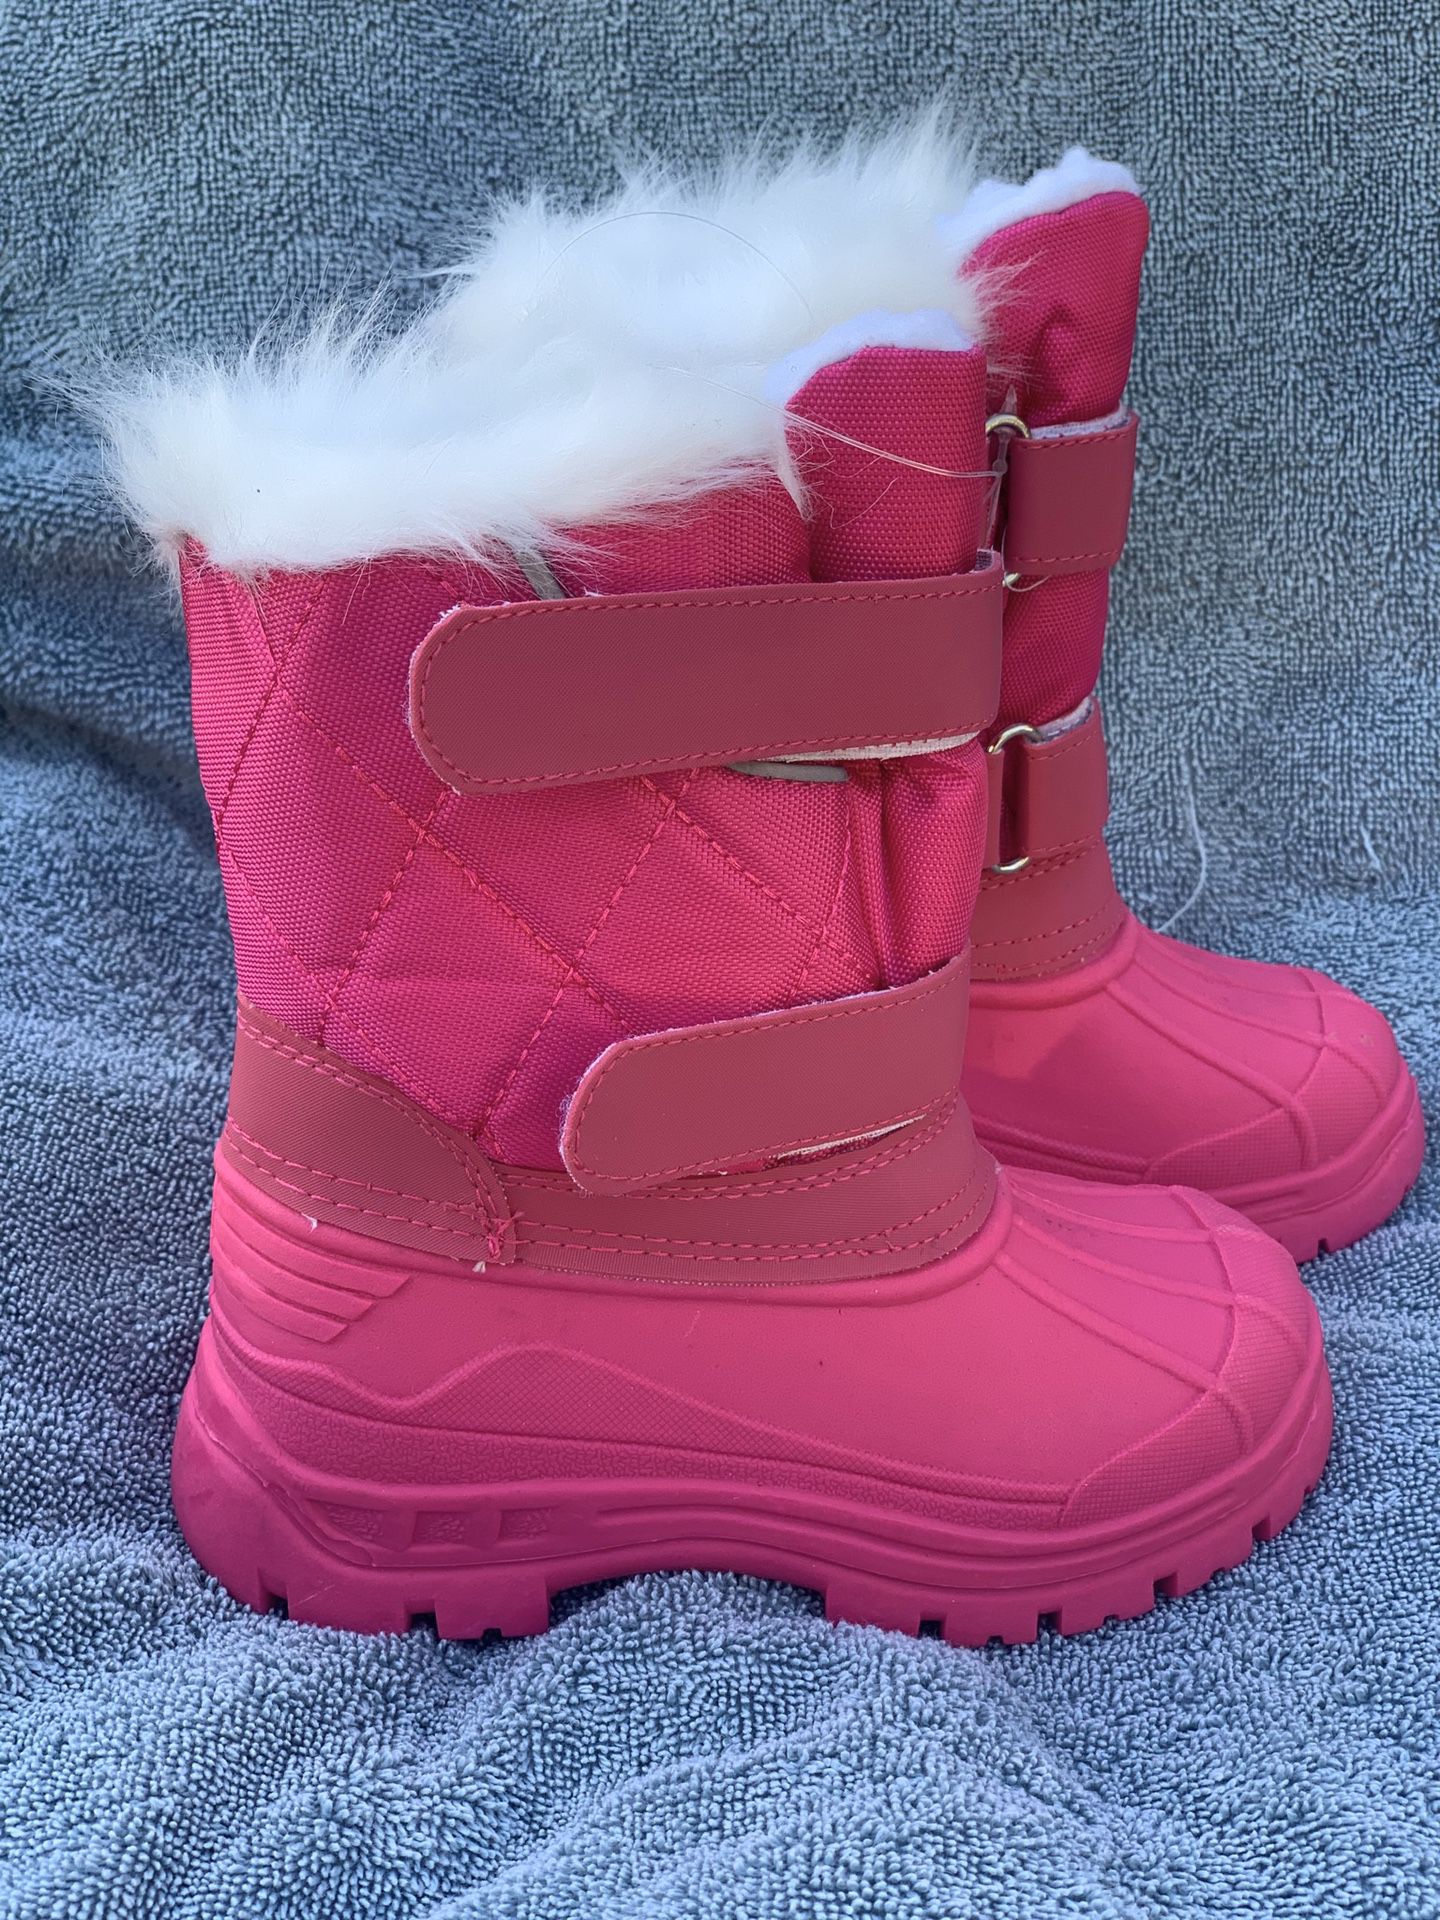 Snow boots for kids little girls toddlers 7,8,9,10,11,12,13,1